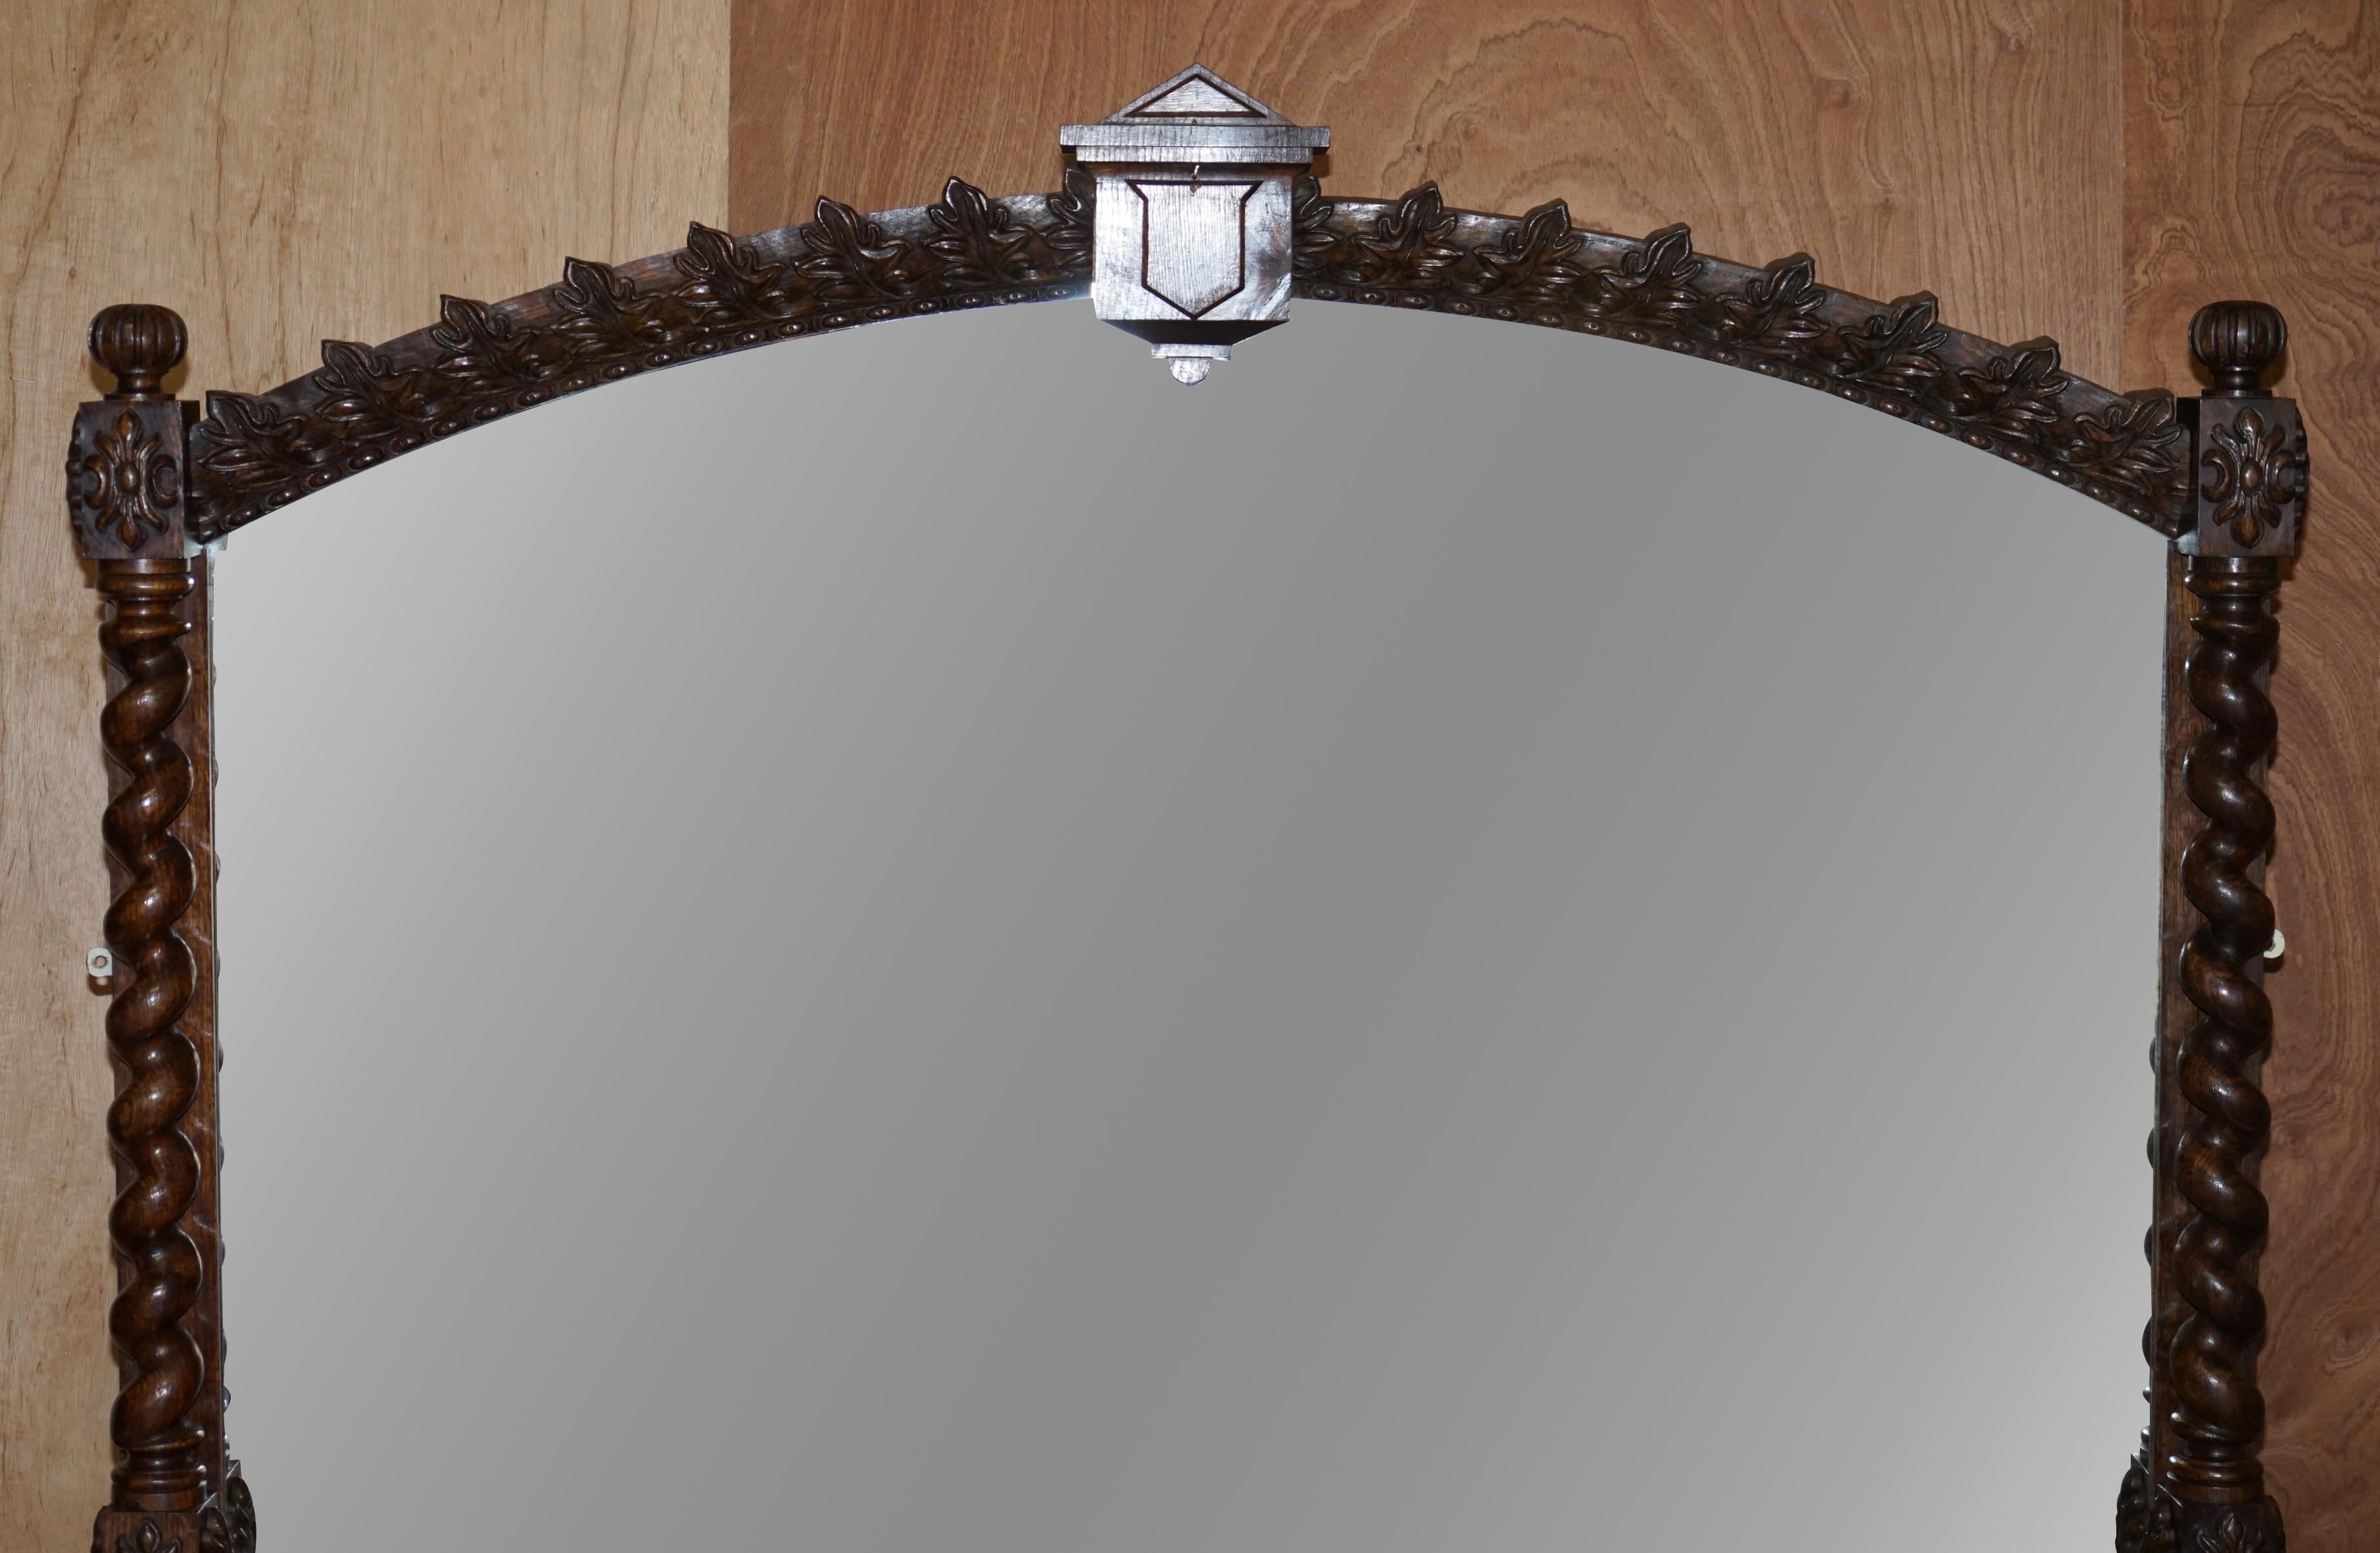 We are delighted to offer stunning original plate glass Victorian mirror with hand carved barley twist oak frame from a grand Lake District estate

This mirror really is impressive, believe it or not it’s actually an over mantle mirror, can you